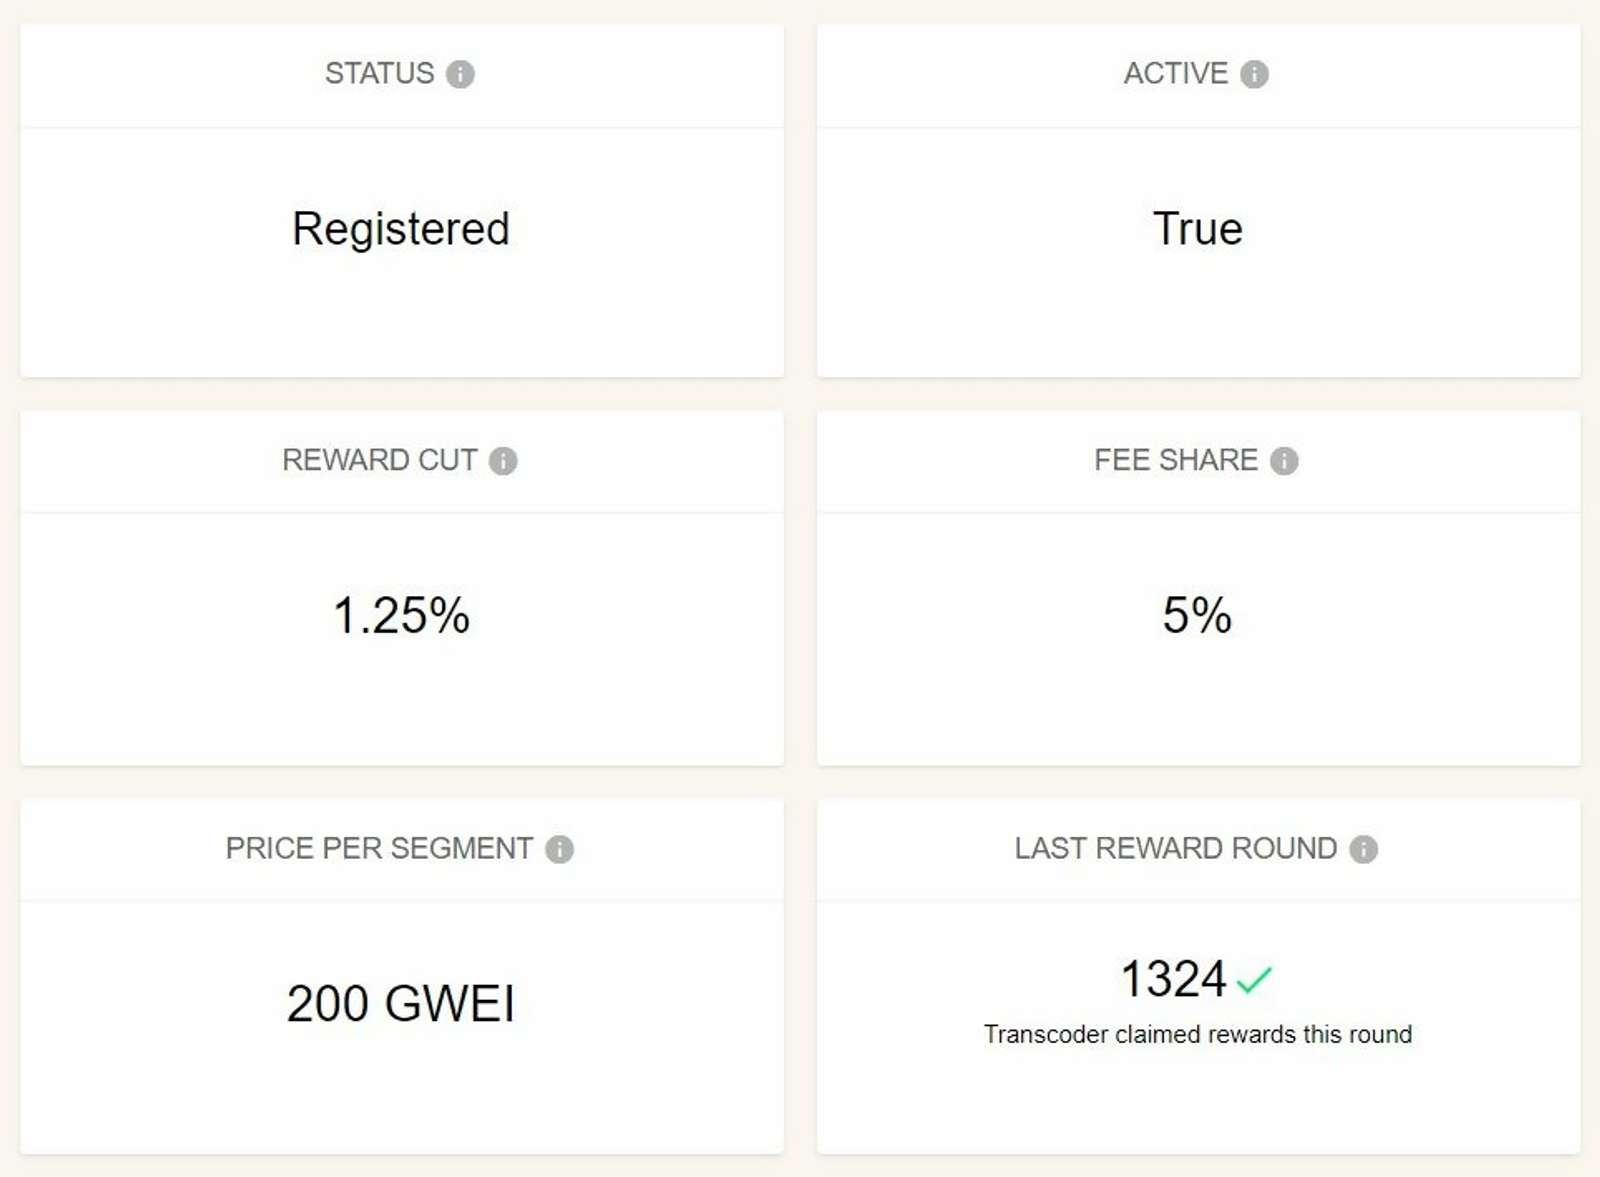 How to Stake Livepeer LPT Tokens? Step-by-step Guide